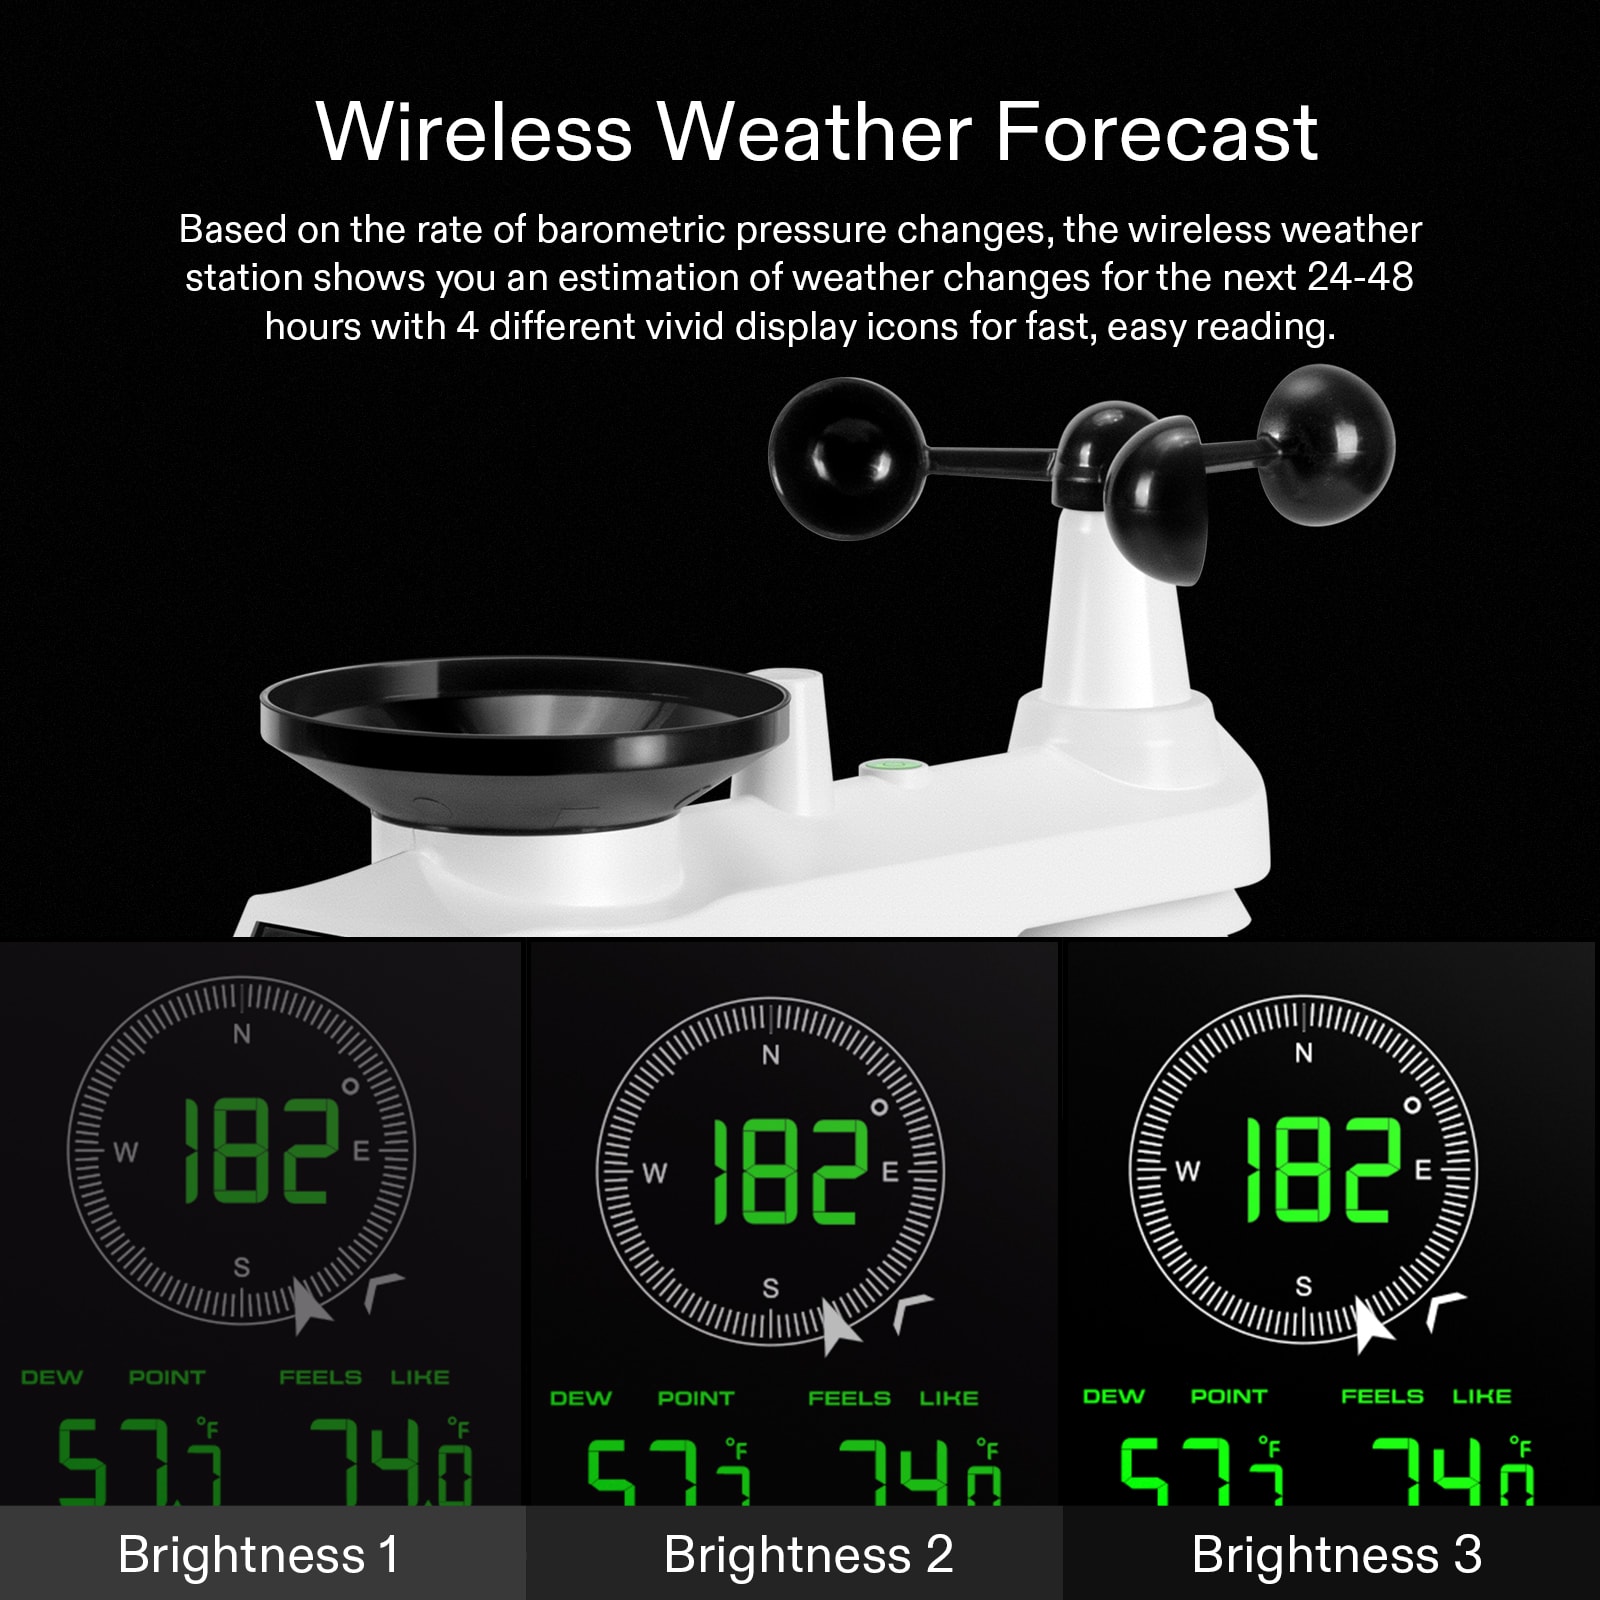 VIVOSUN 18-in-1 Wi-Fi Weather Station with Outdoor Sensor, CO2 Monitor,  Color Display Console, Indoor/Outdoor Weather Thermometer, Weather  Forecast